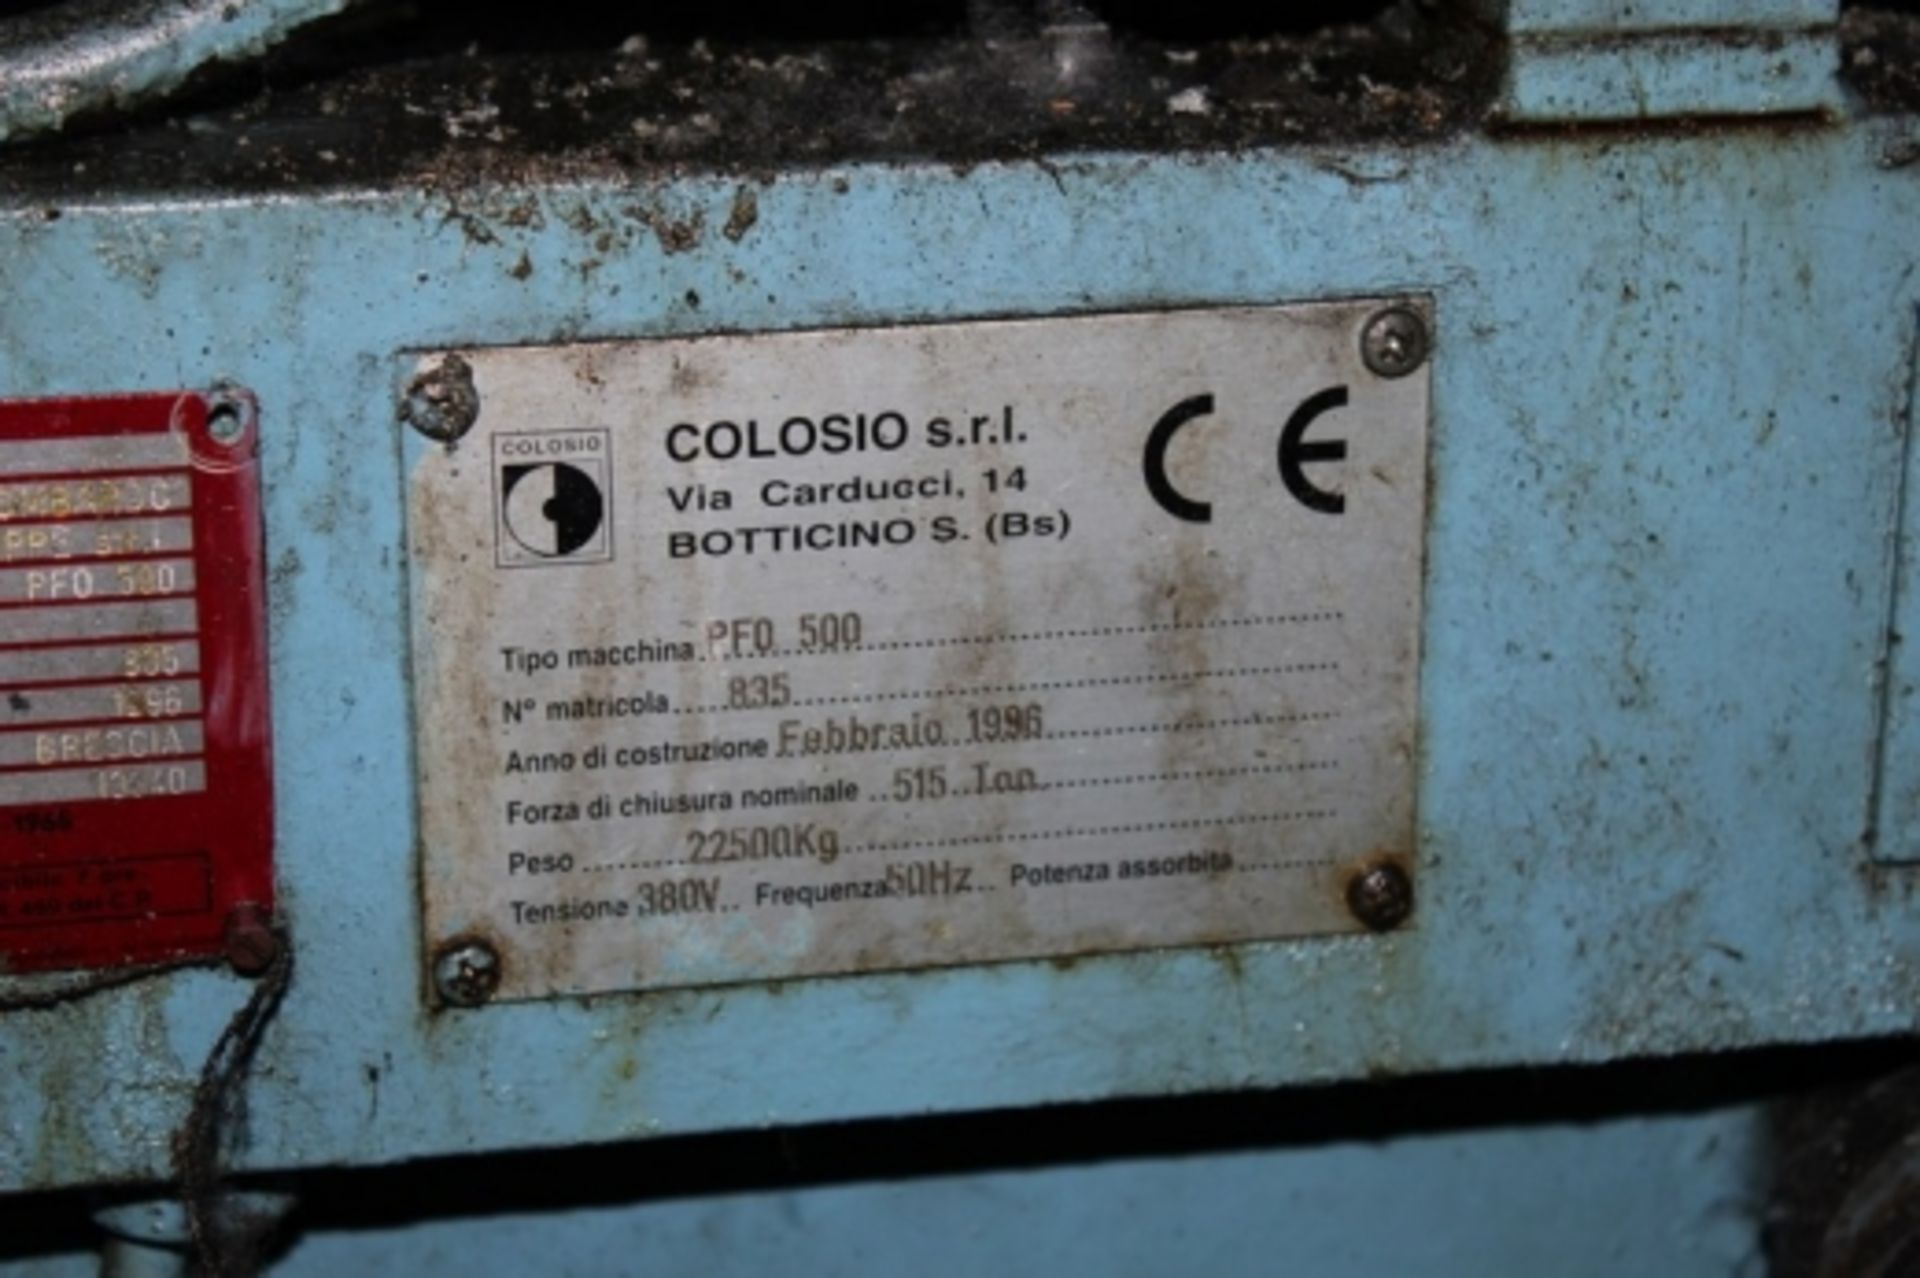 1,Die casting unit 500Colosio for moulding and die casting PFO 500 year 1996, serial no. 835 power - Image 2 of 21